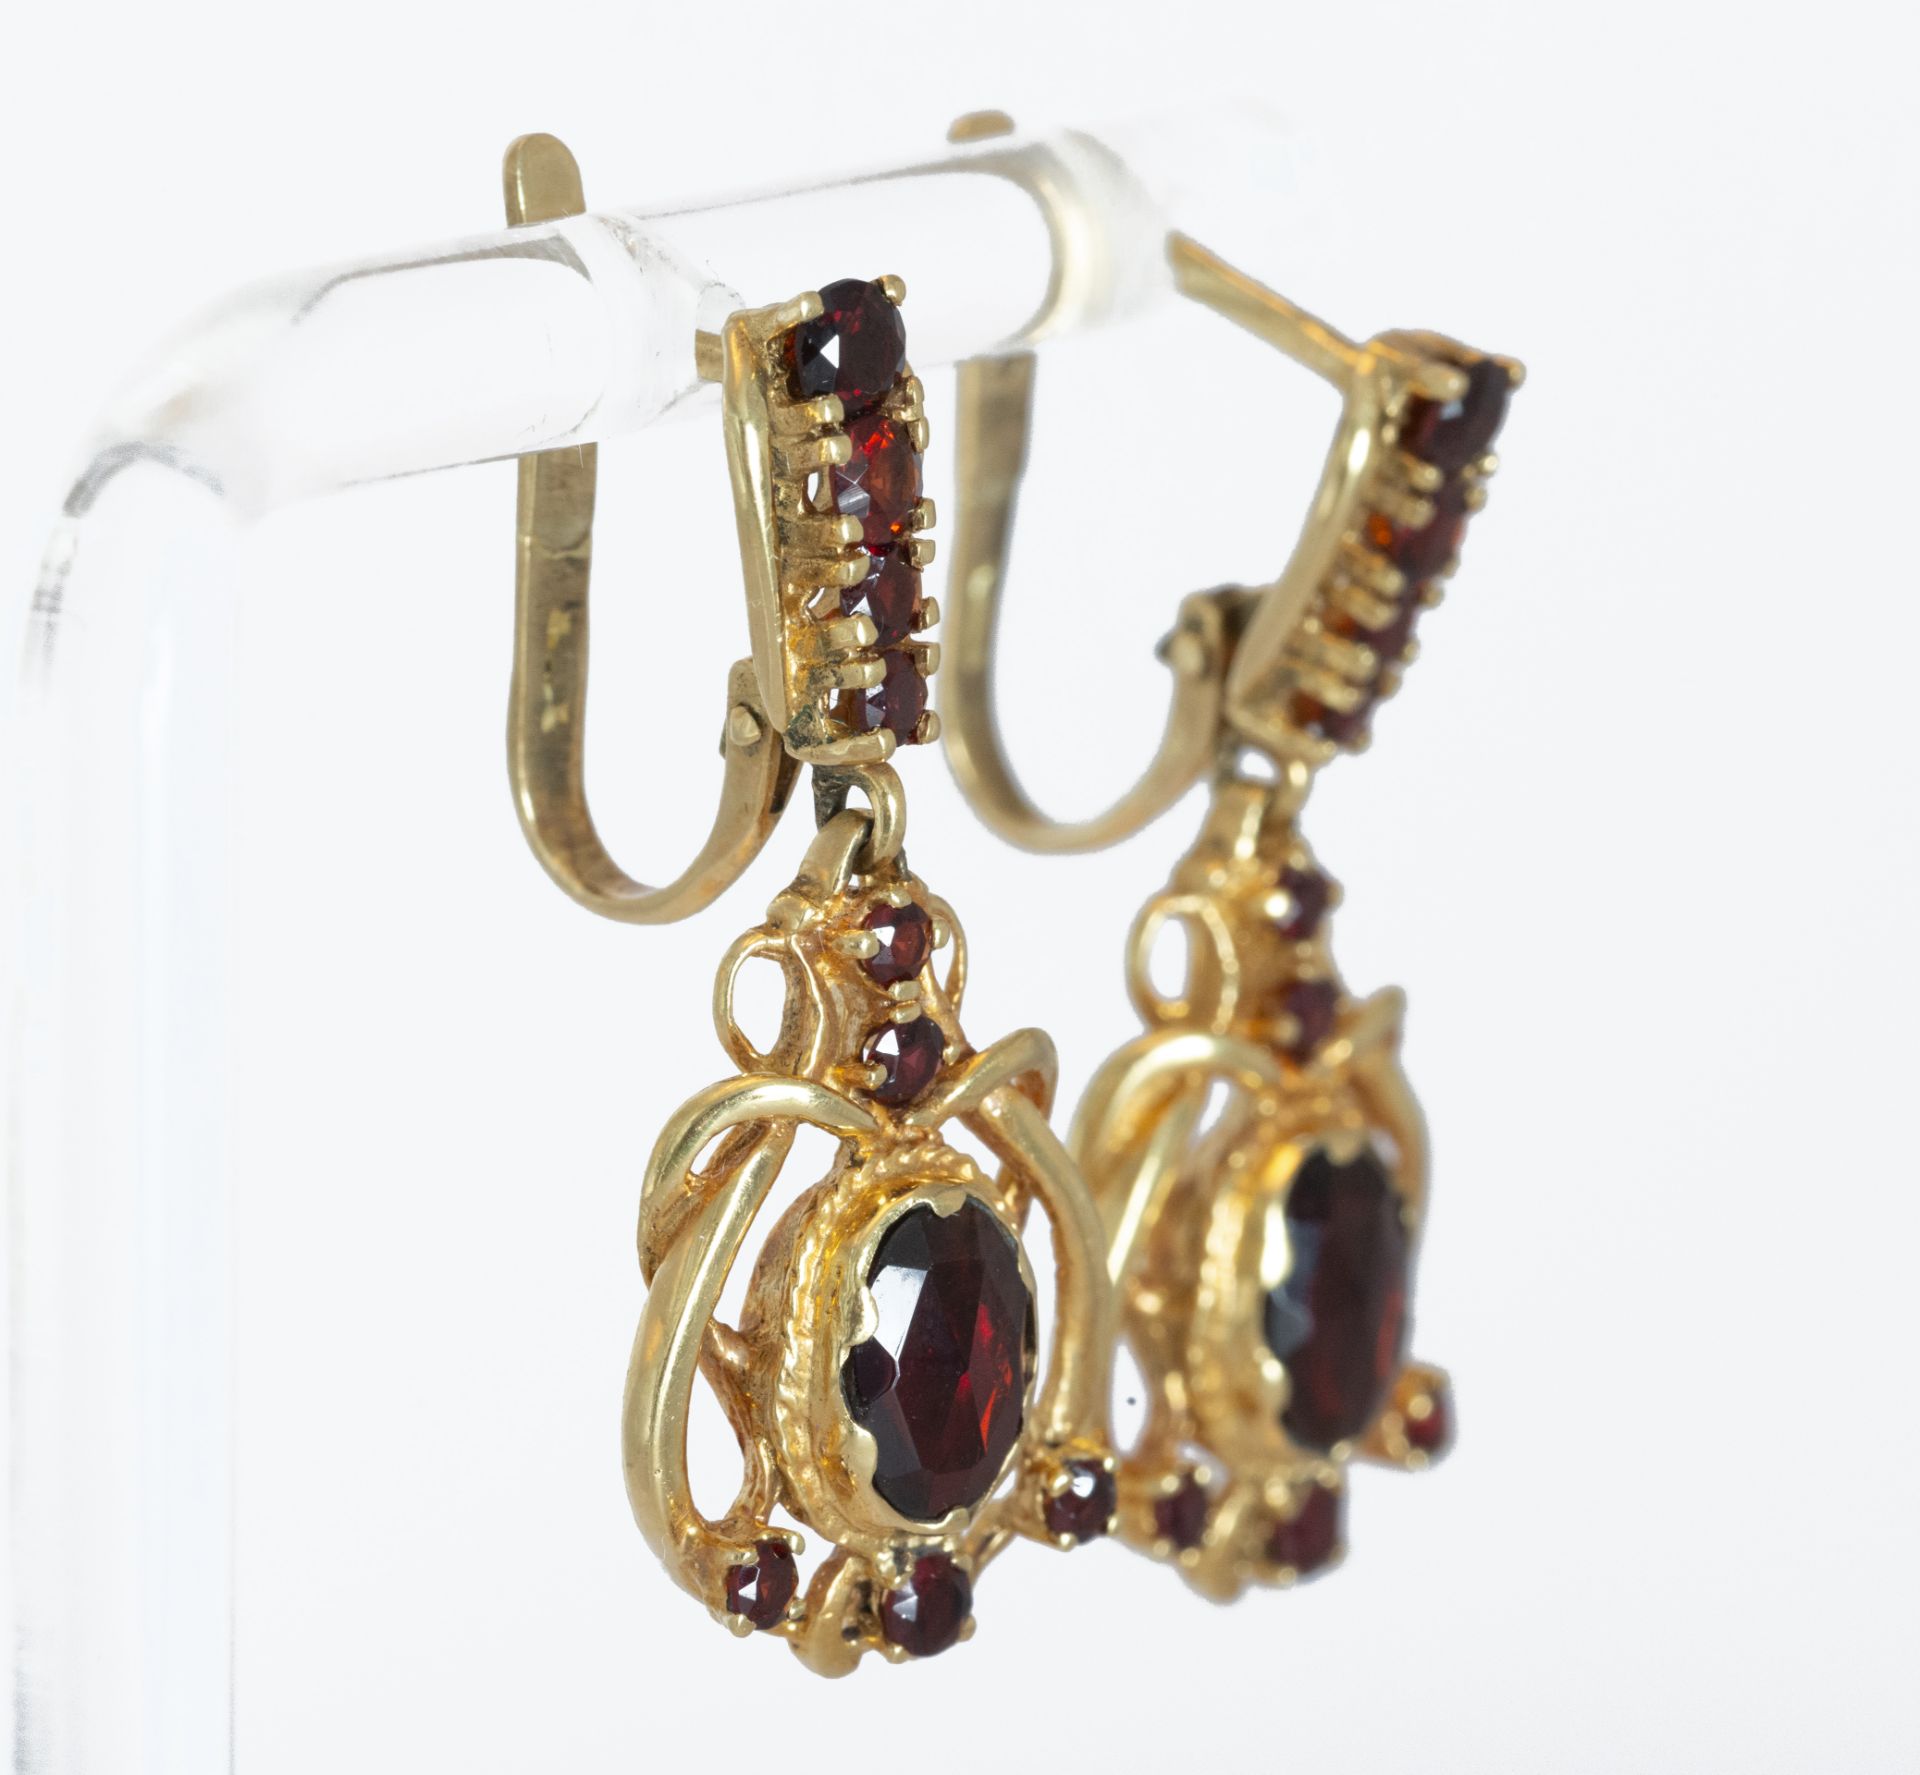 18kt gold earrings with garnets - Image 3 of 4